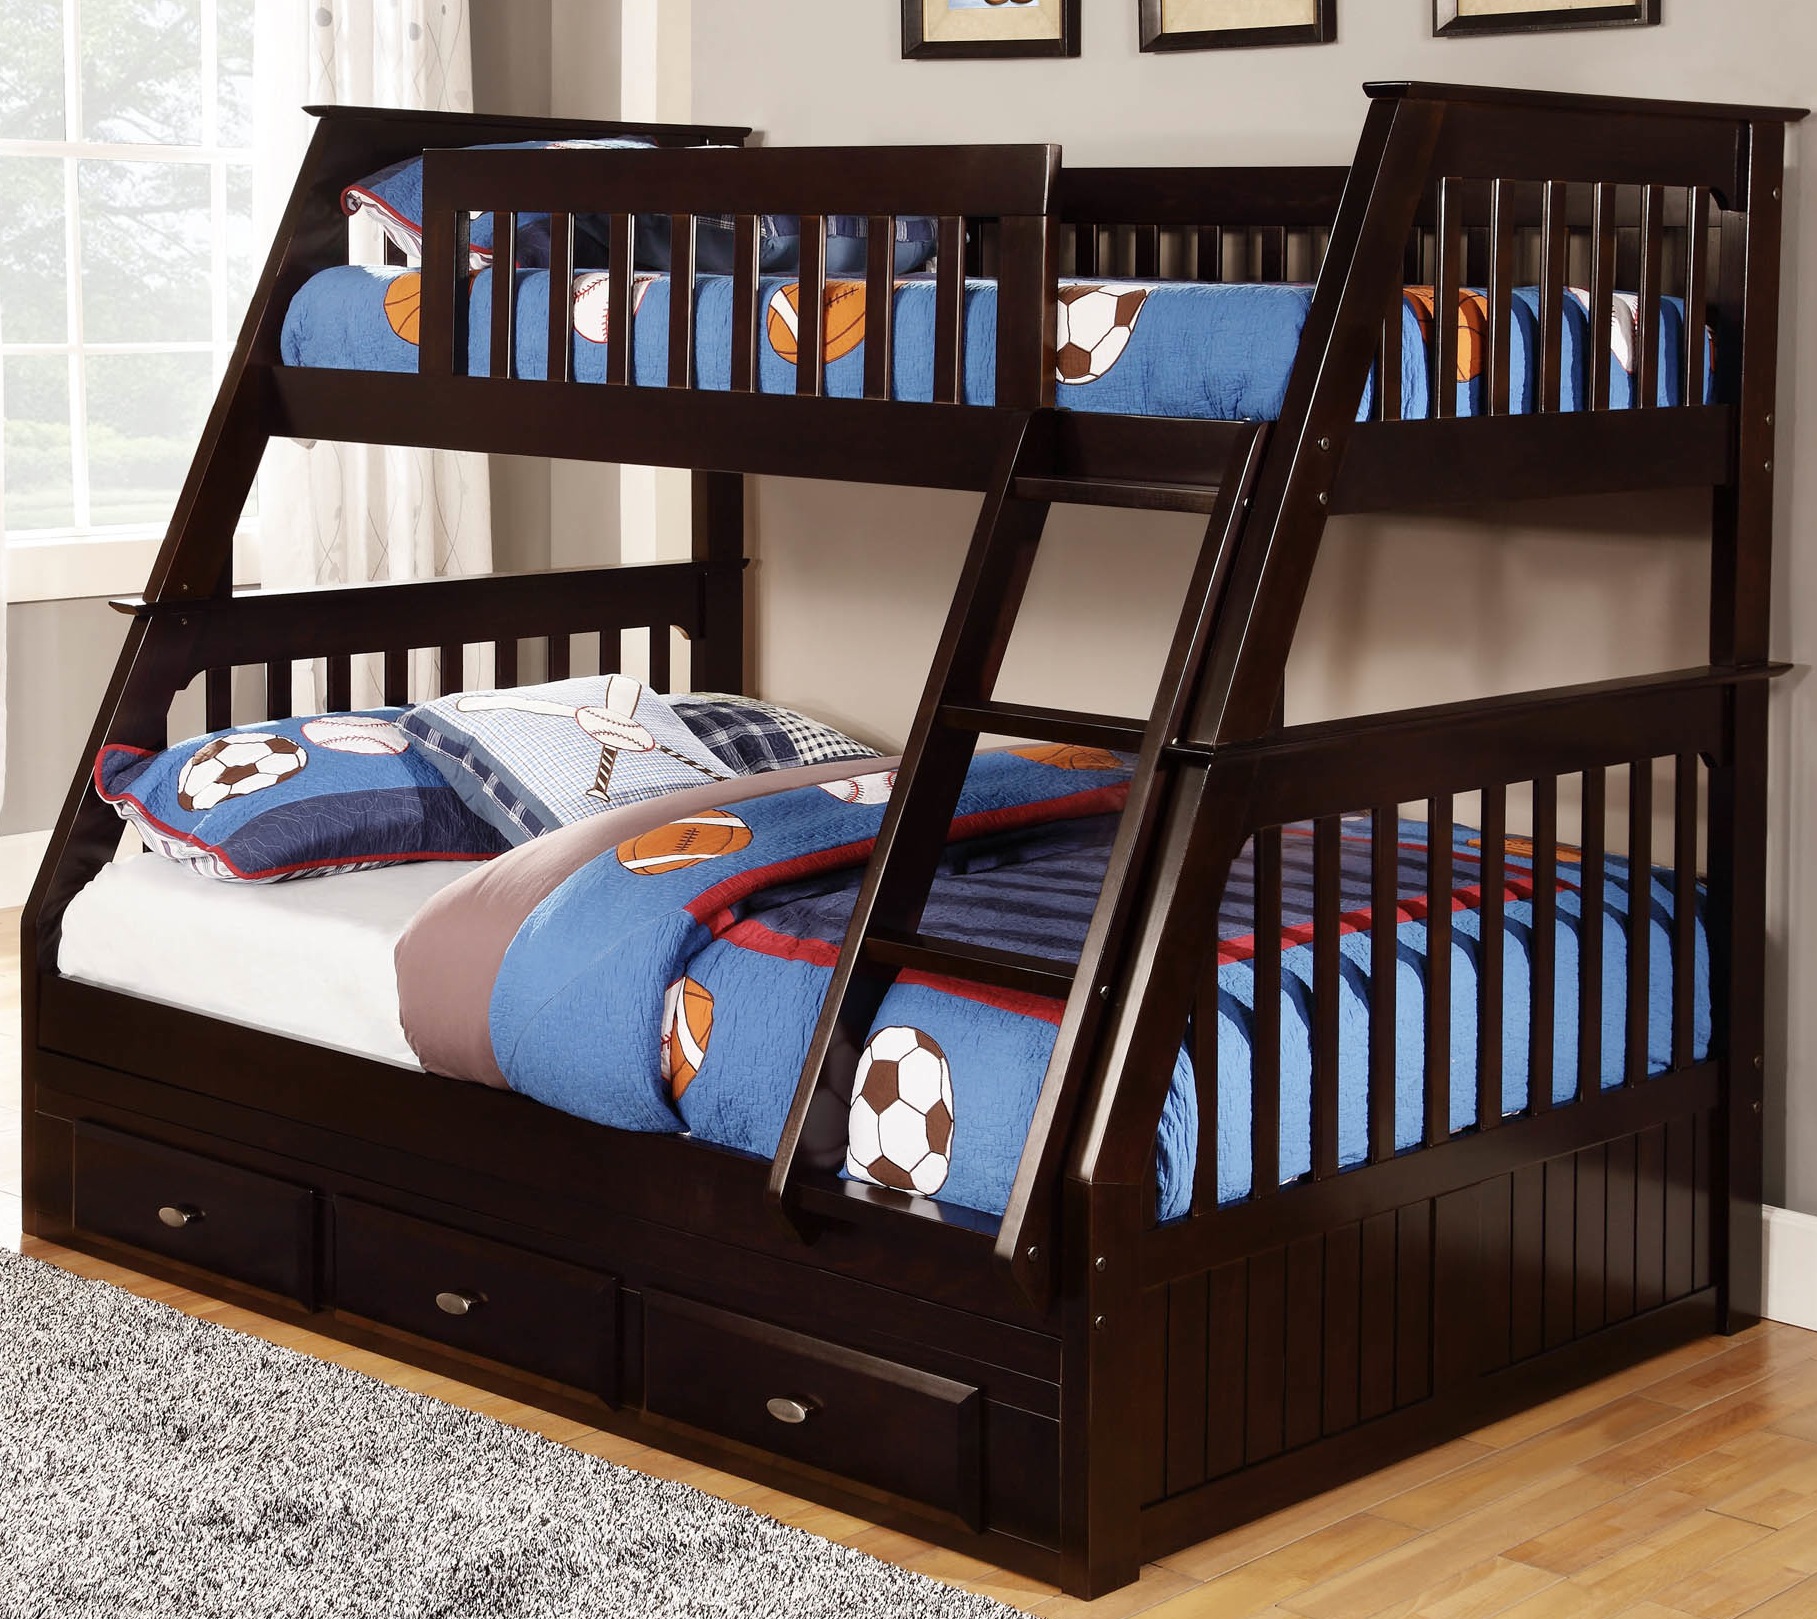 Espresso Mission Bunk Bed Kfs S, Twin Full Bunk Bed With Mattresses